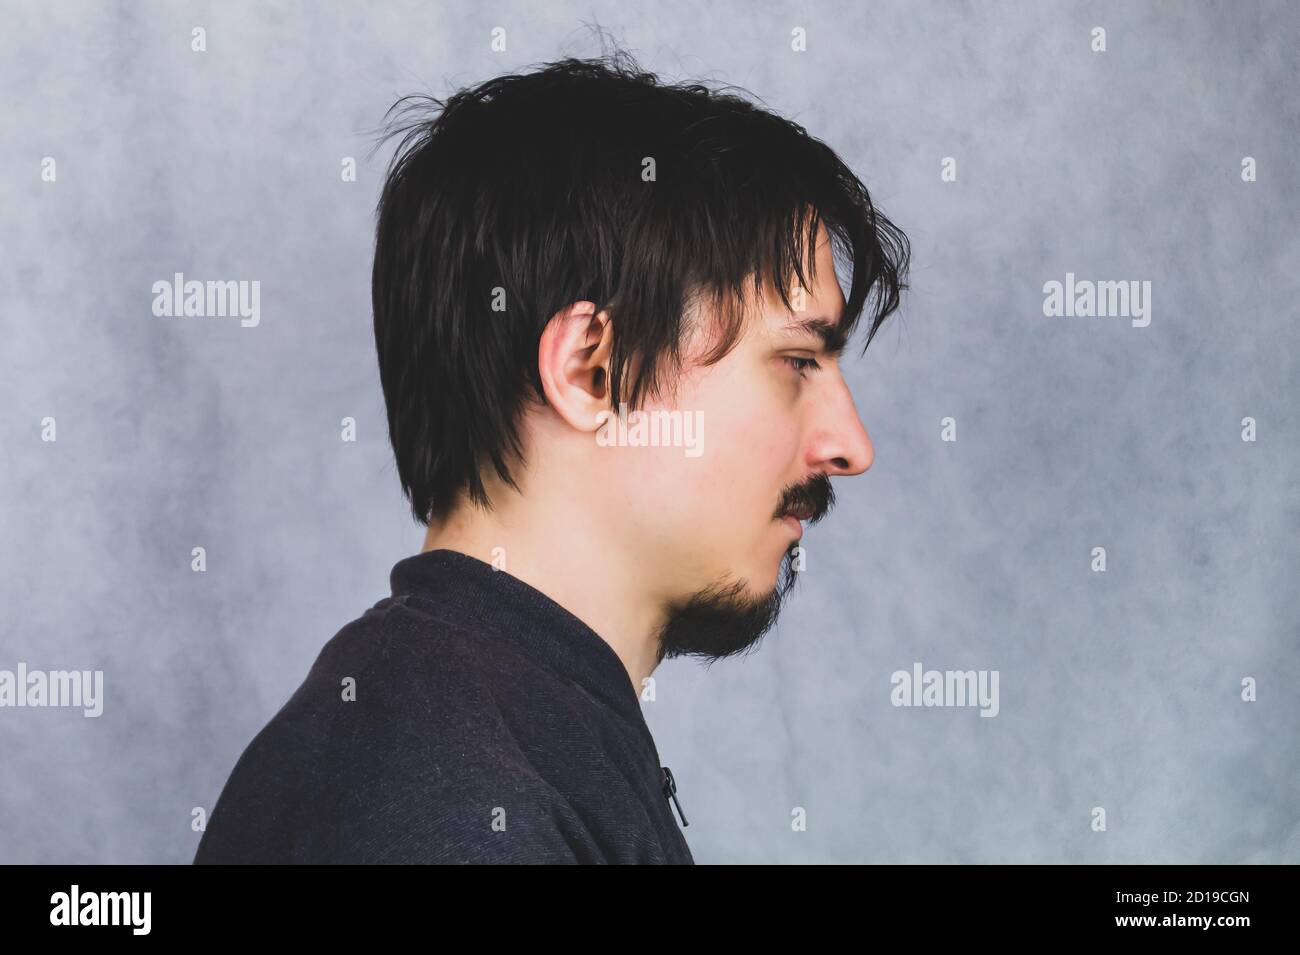 Profile view of young man with black hair on the gray background Stock Photo